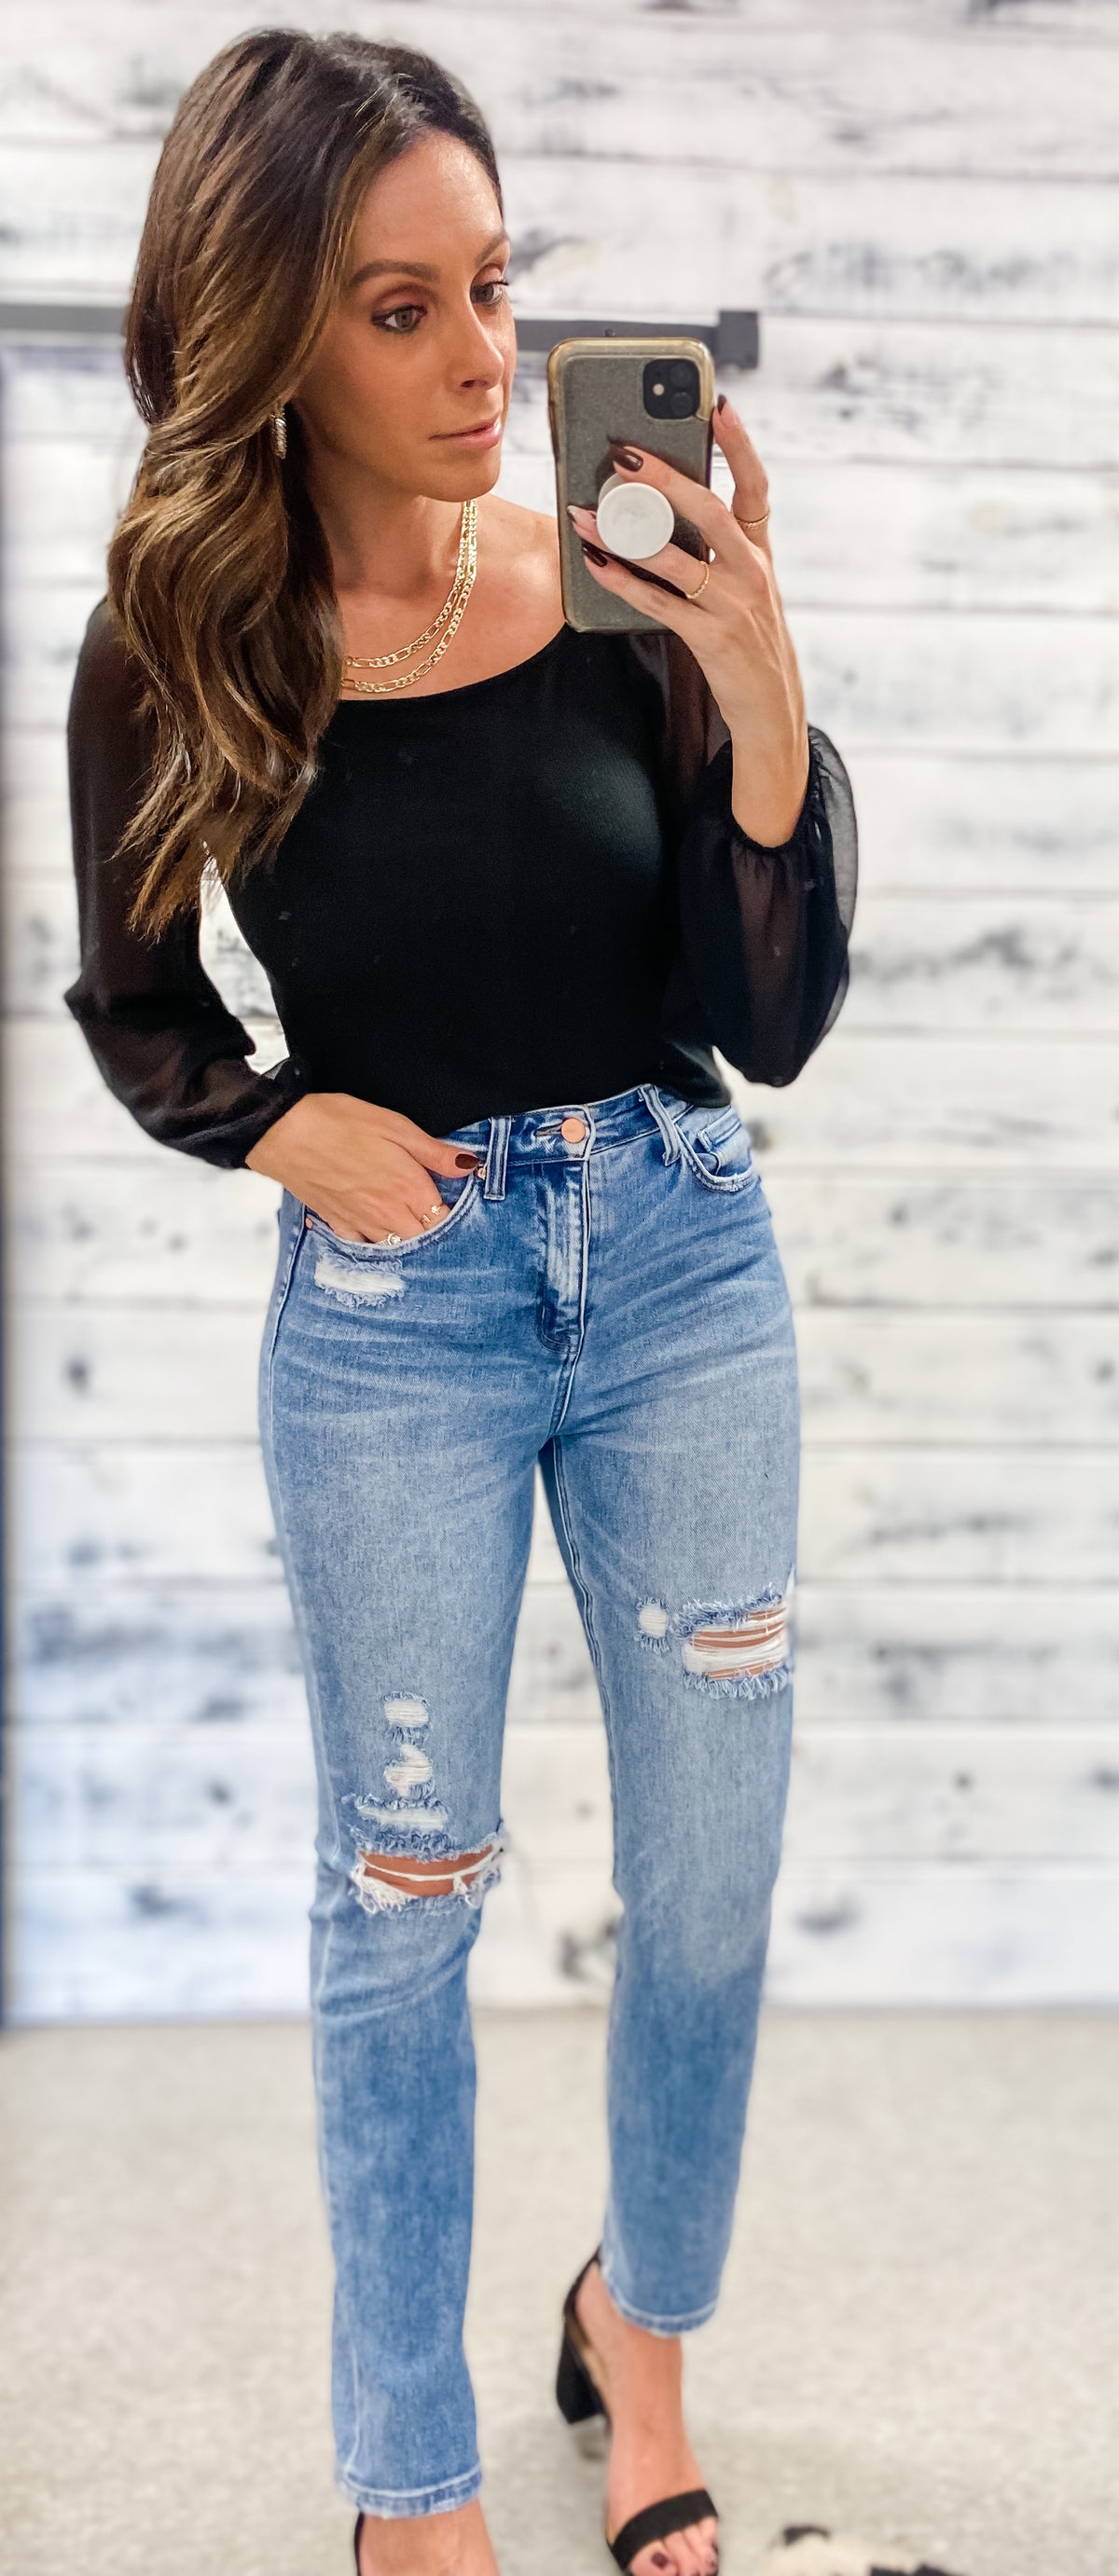 Black Ribbed Square Neck Top W/Sheer Sleeves